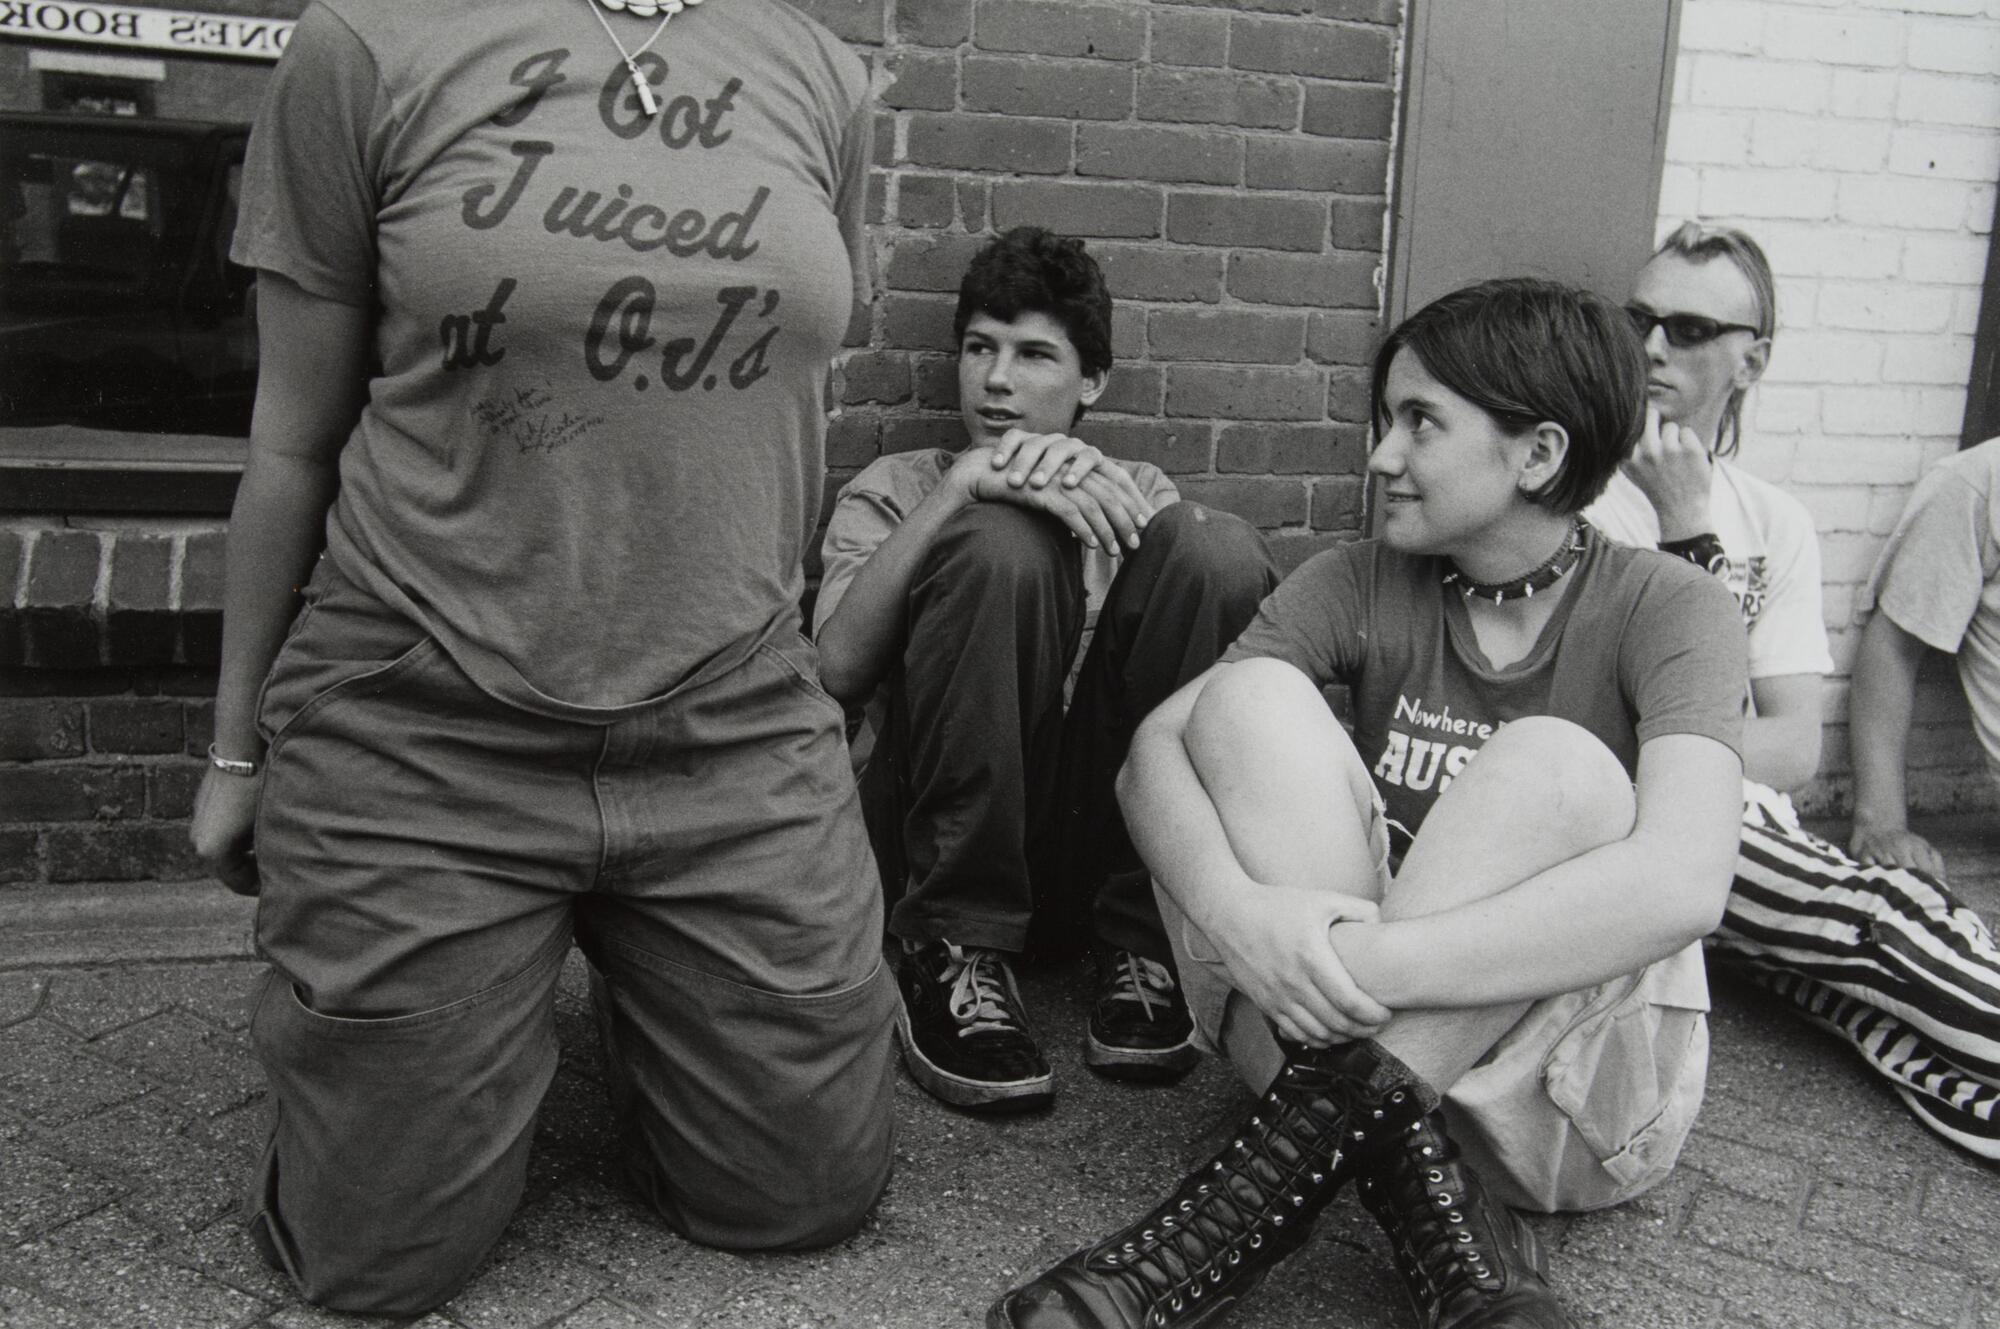 A girl kneeling with a &quot;I Just Got Juiced at O.J.&#39;s&quot; shirt on, another girl wearing combat boots.